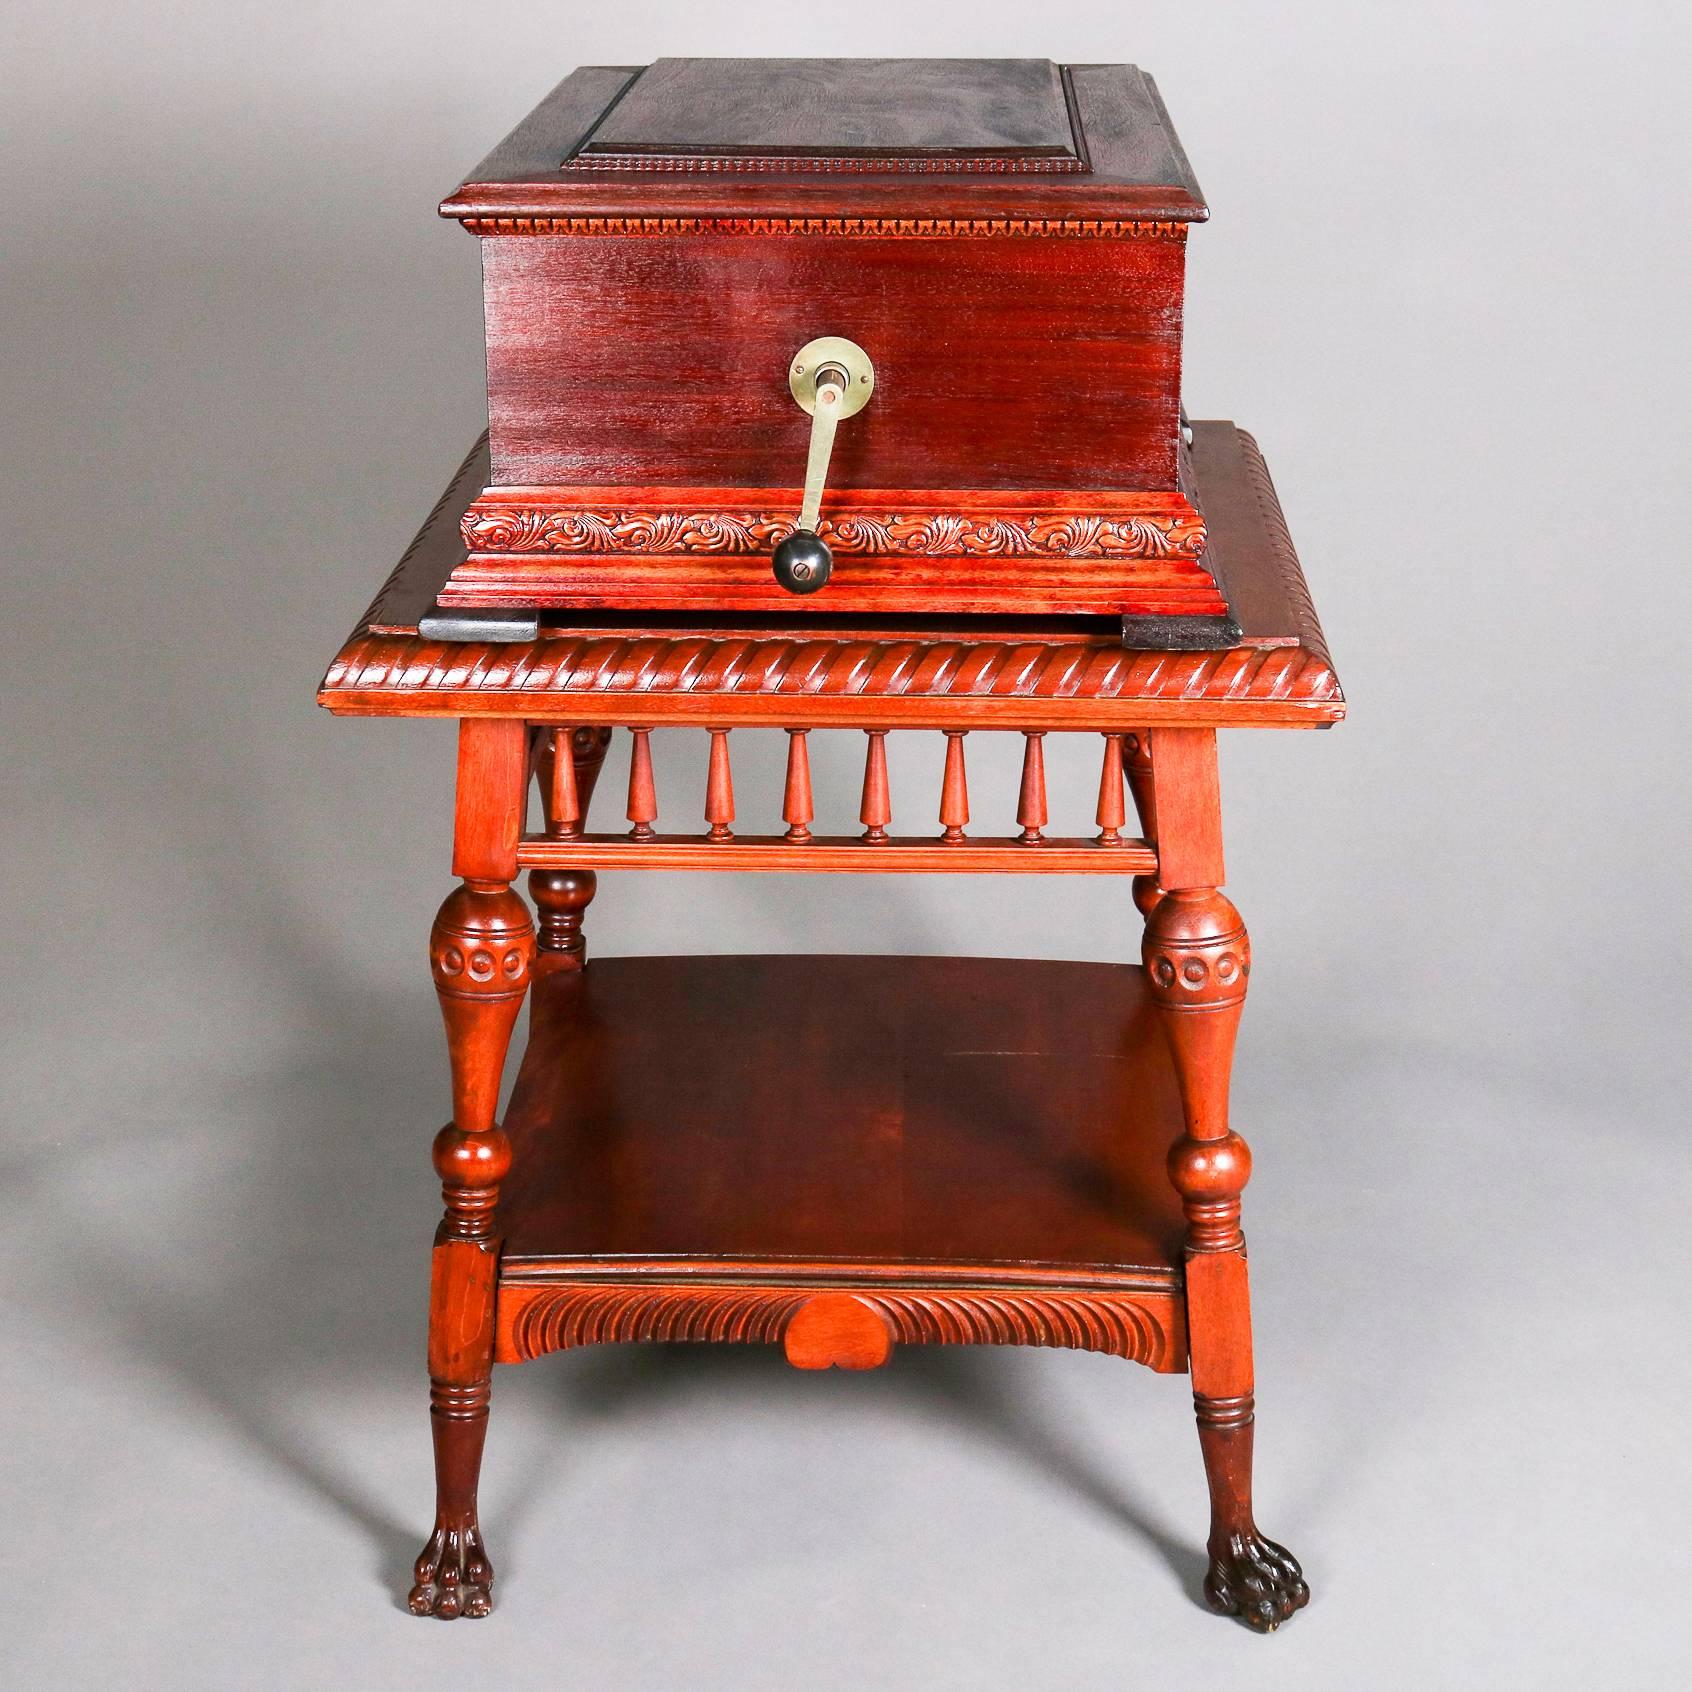 Antique Stella Double Comb Music Box with Mahogany Case and Stand, 19th Century 2